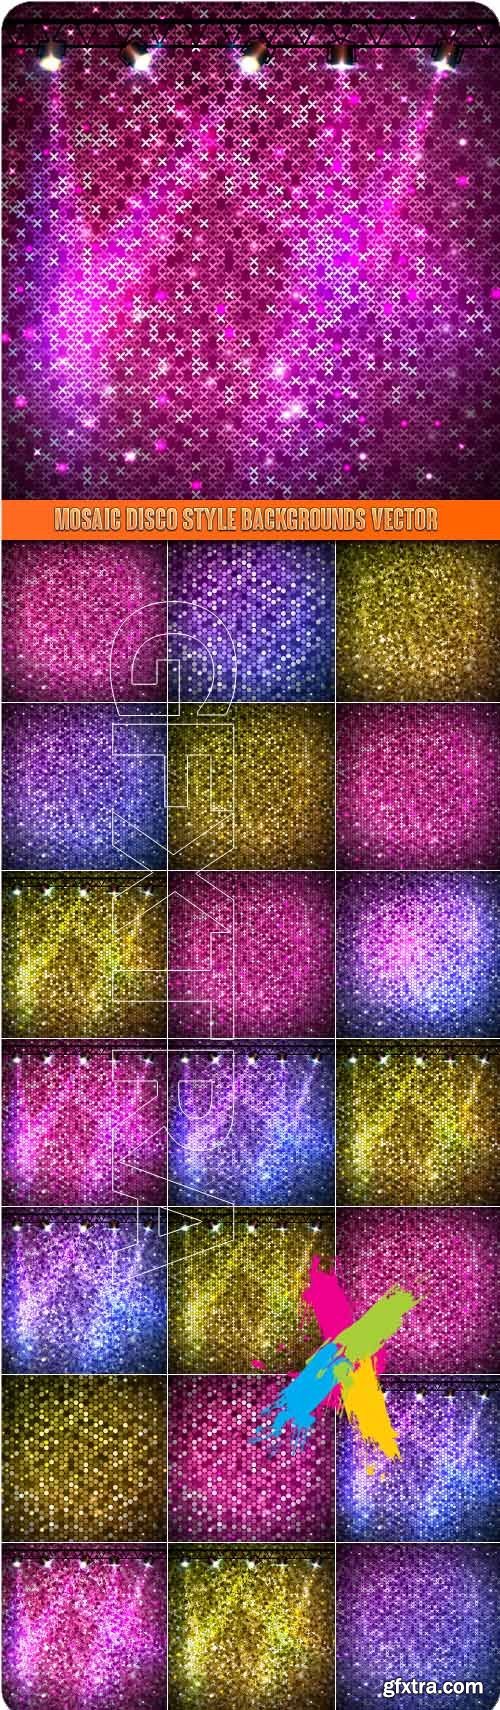 Mosaic disco style backgrounds vector